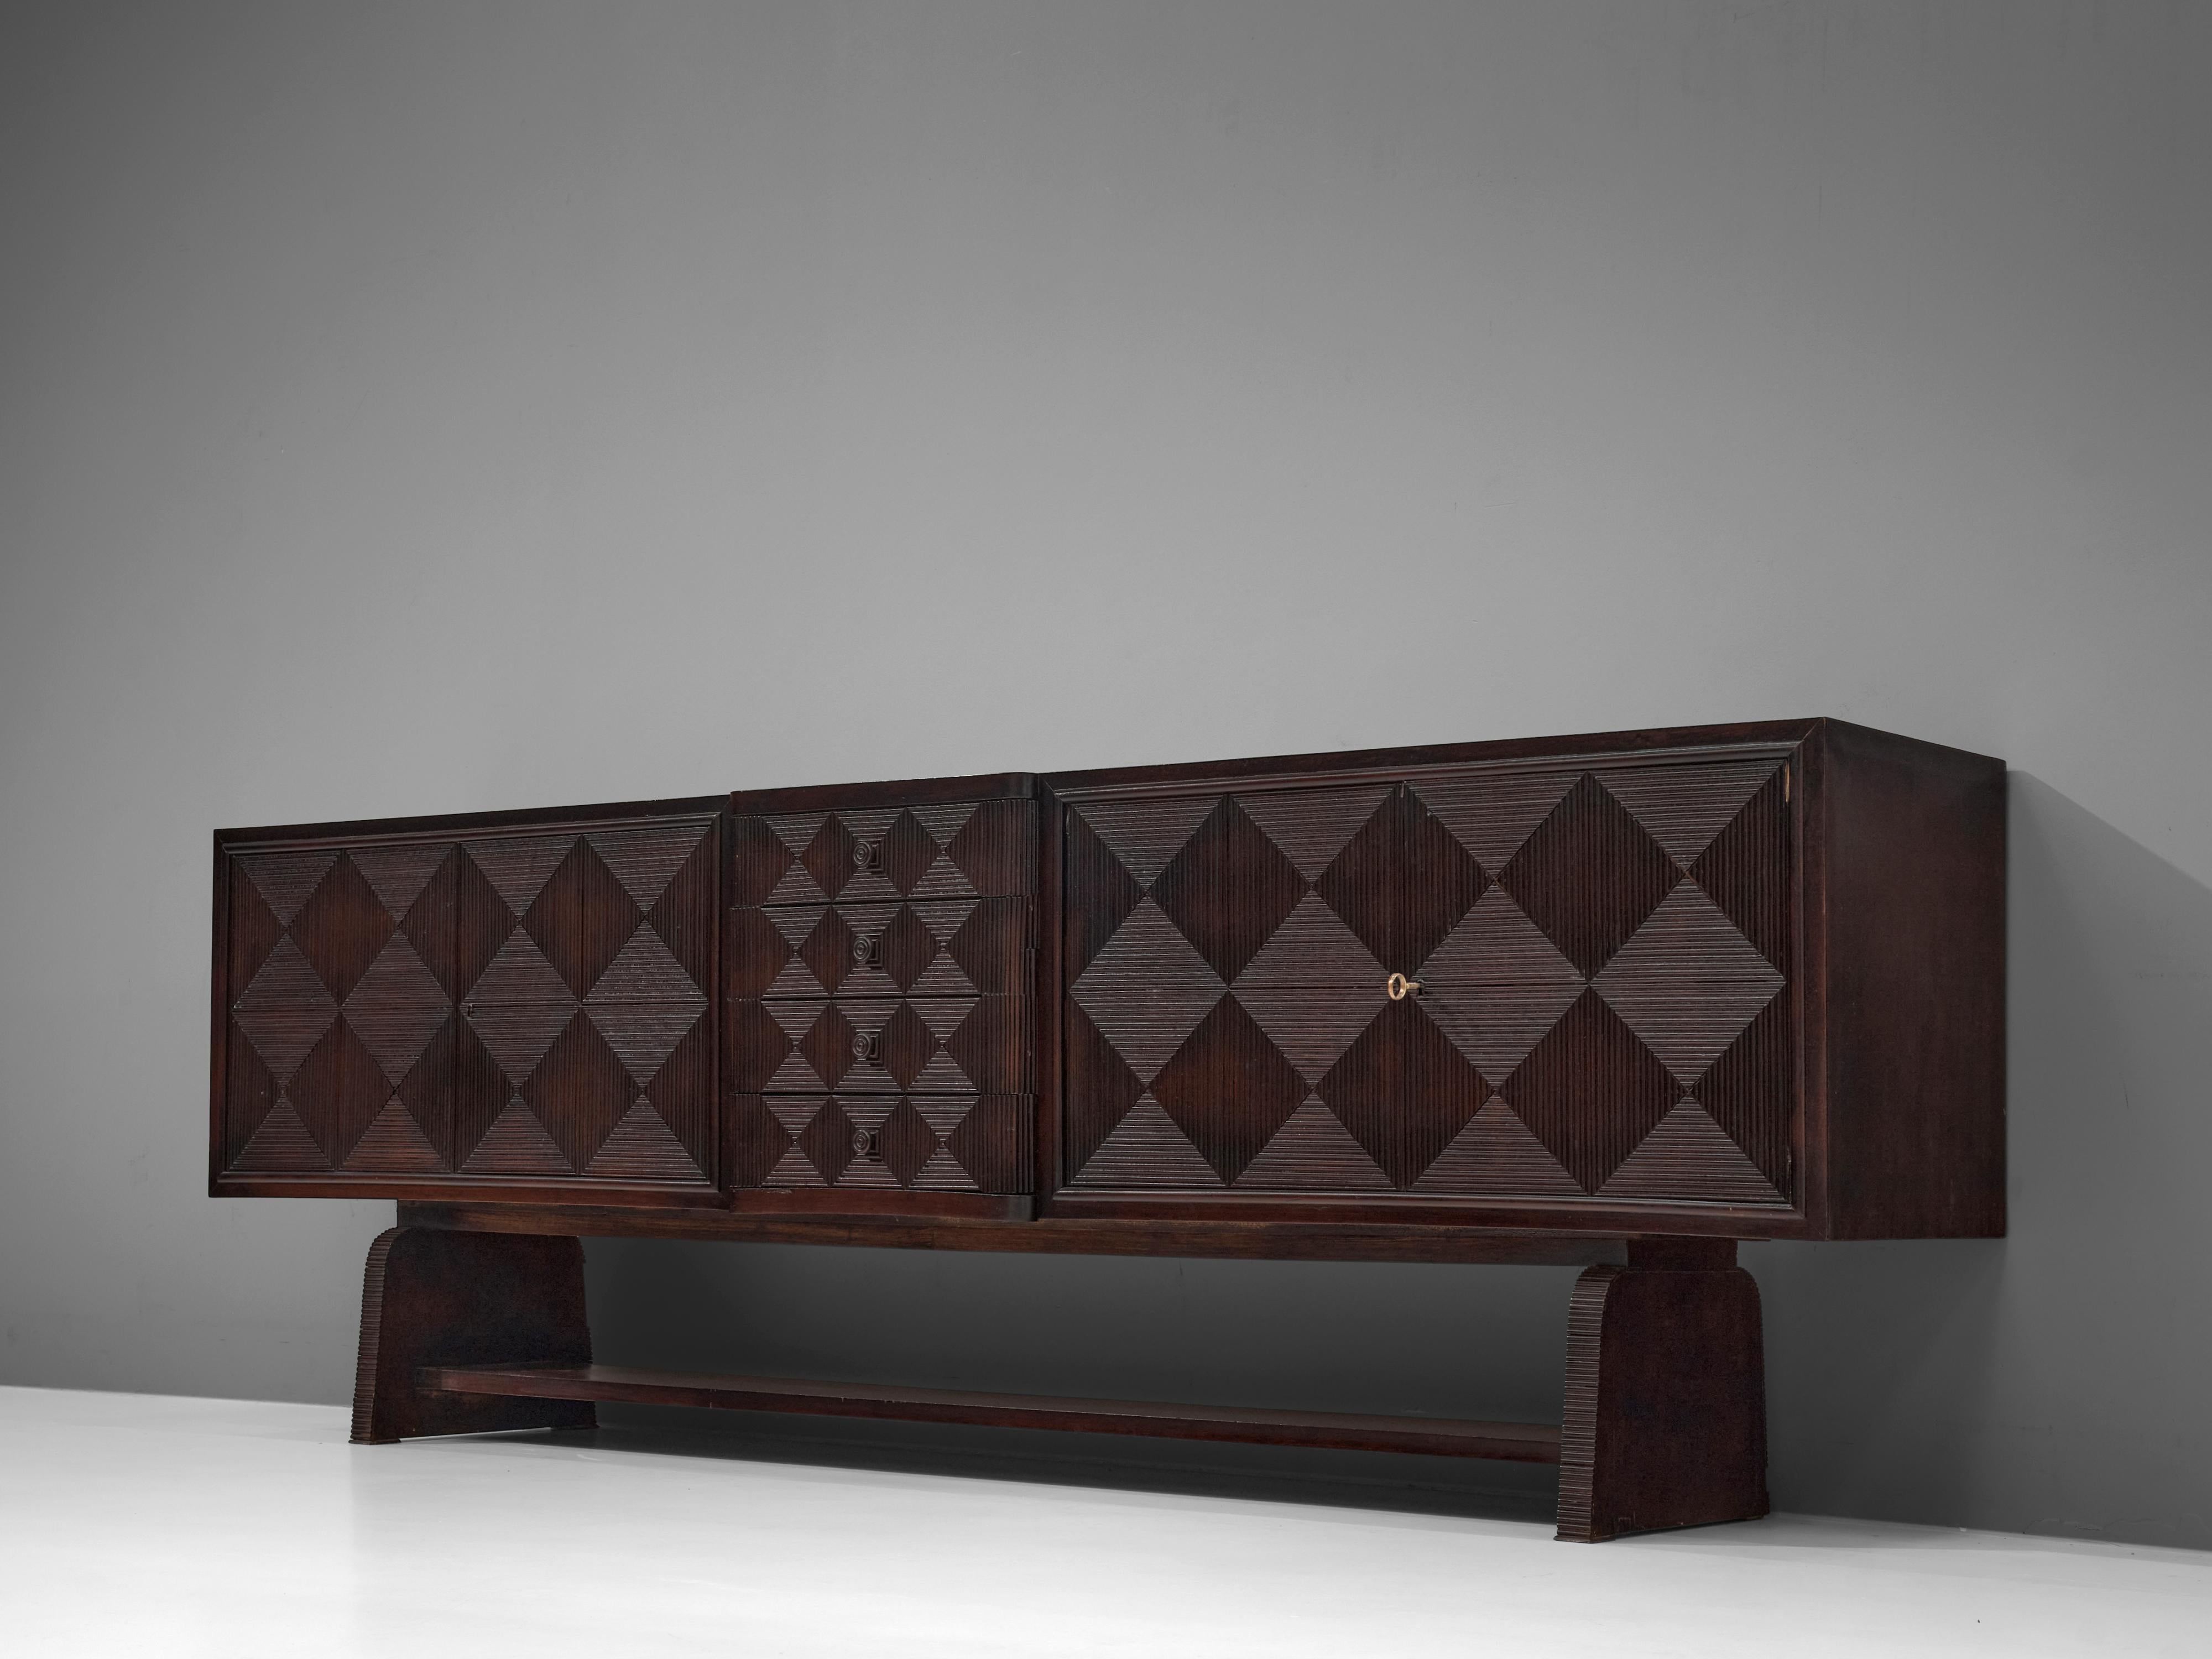 European sideboard, wood, brass, Europe, 1960s 

Rare sideboard with striking front with geometric pattern. Triangular and rhombus-shaped elements with carved lines are arranged in the way that a strong visual structure is created. In the center